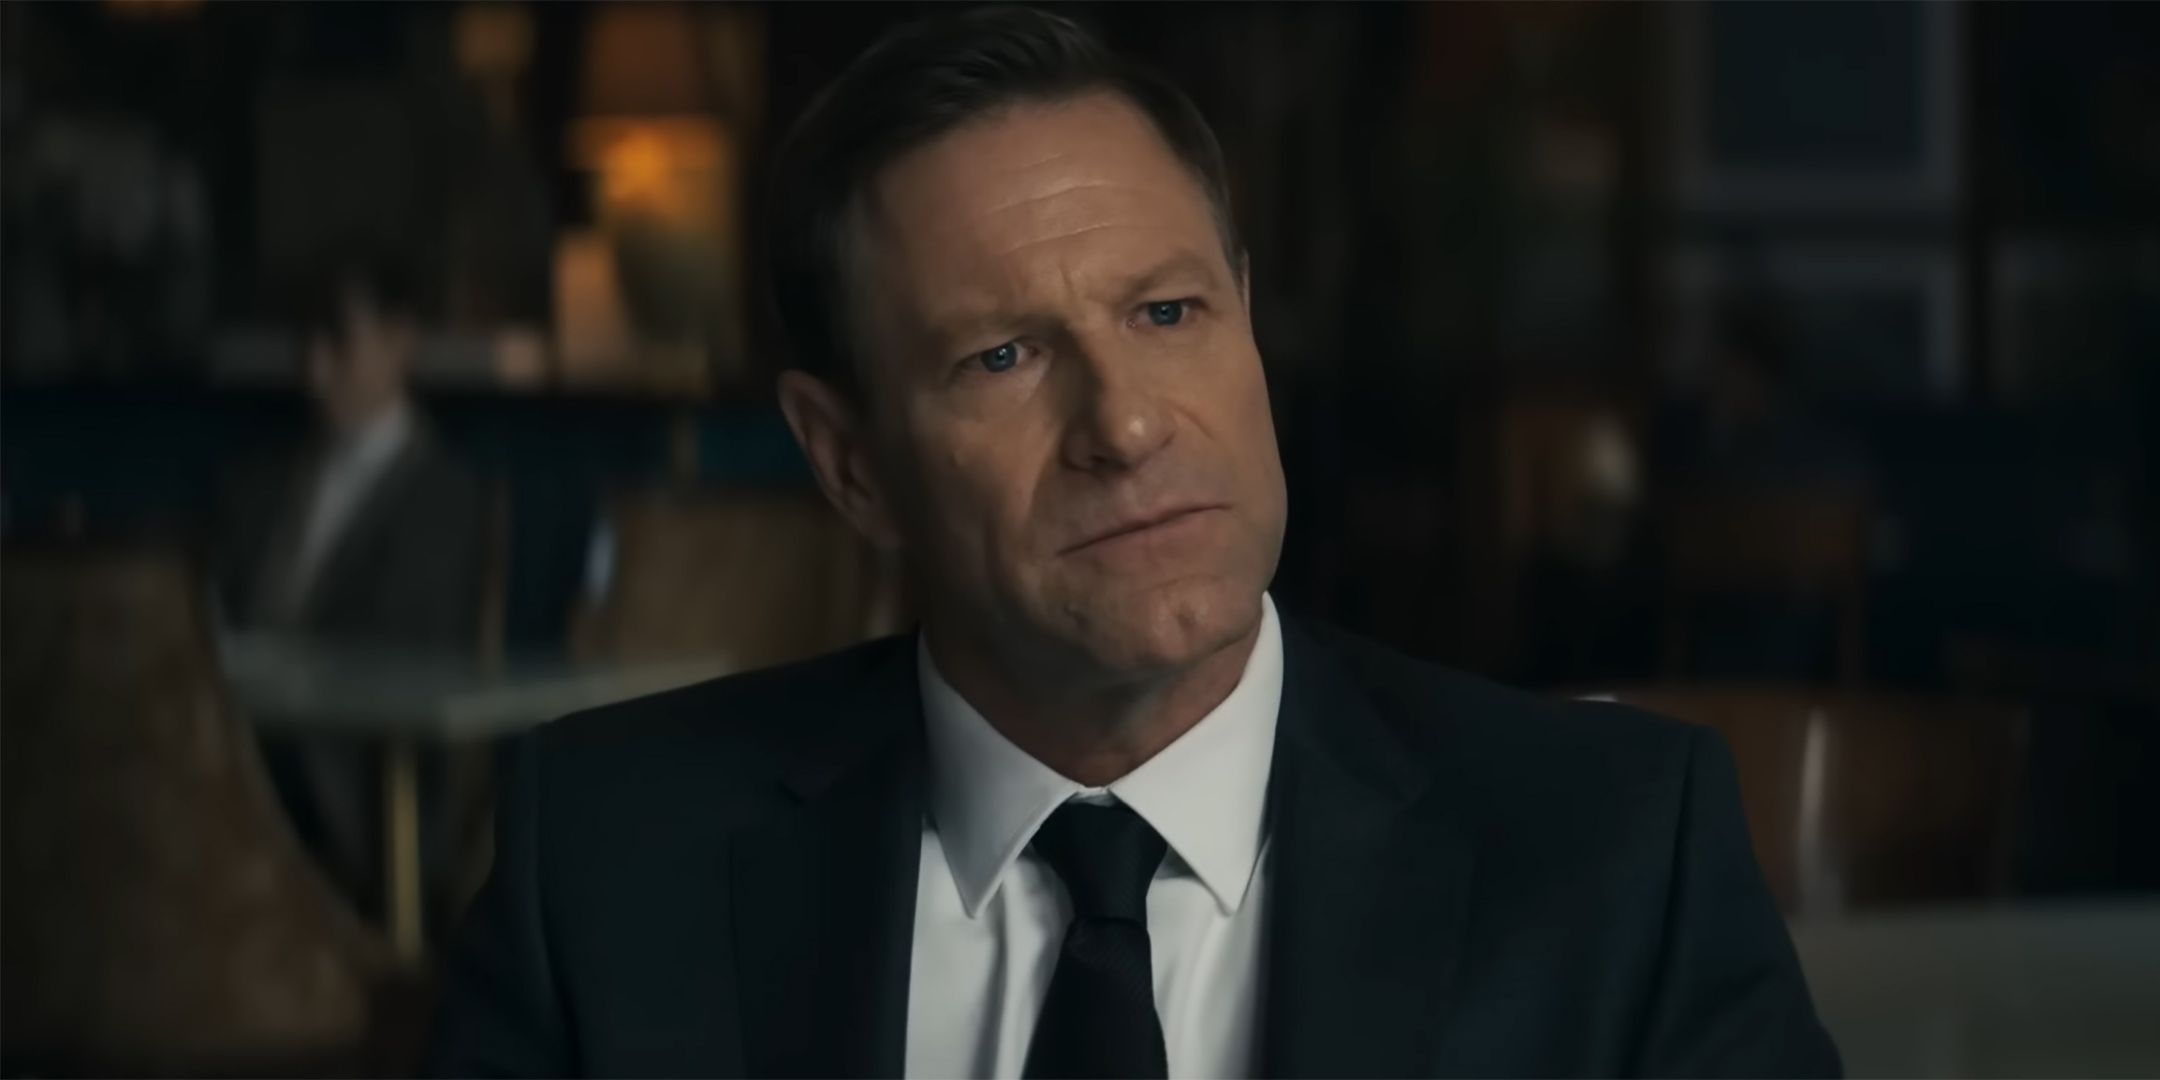 Aaron Eckhart as Ben looking intrigued in Chief of Station